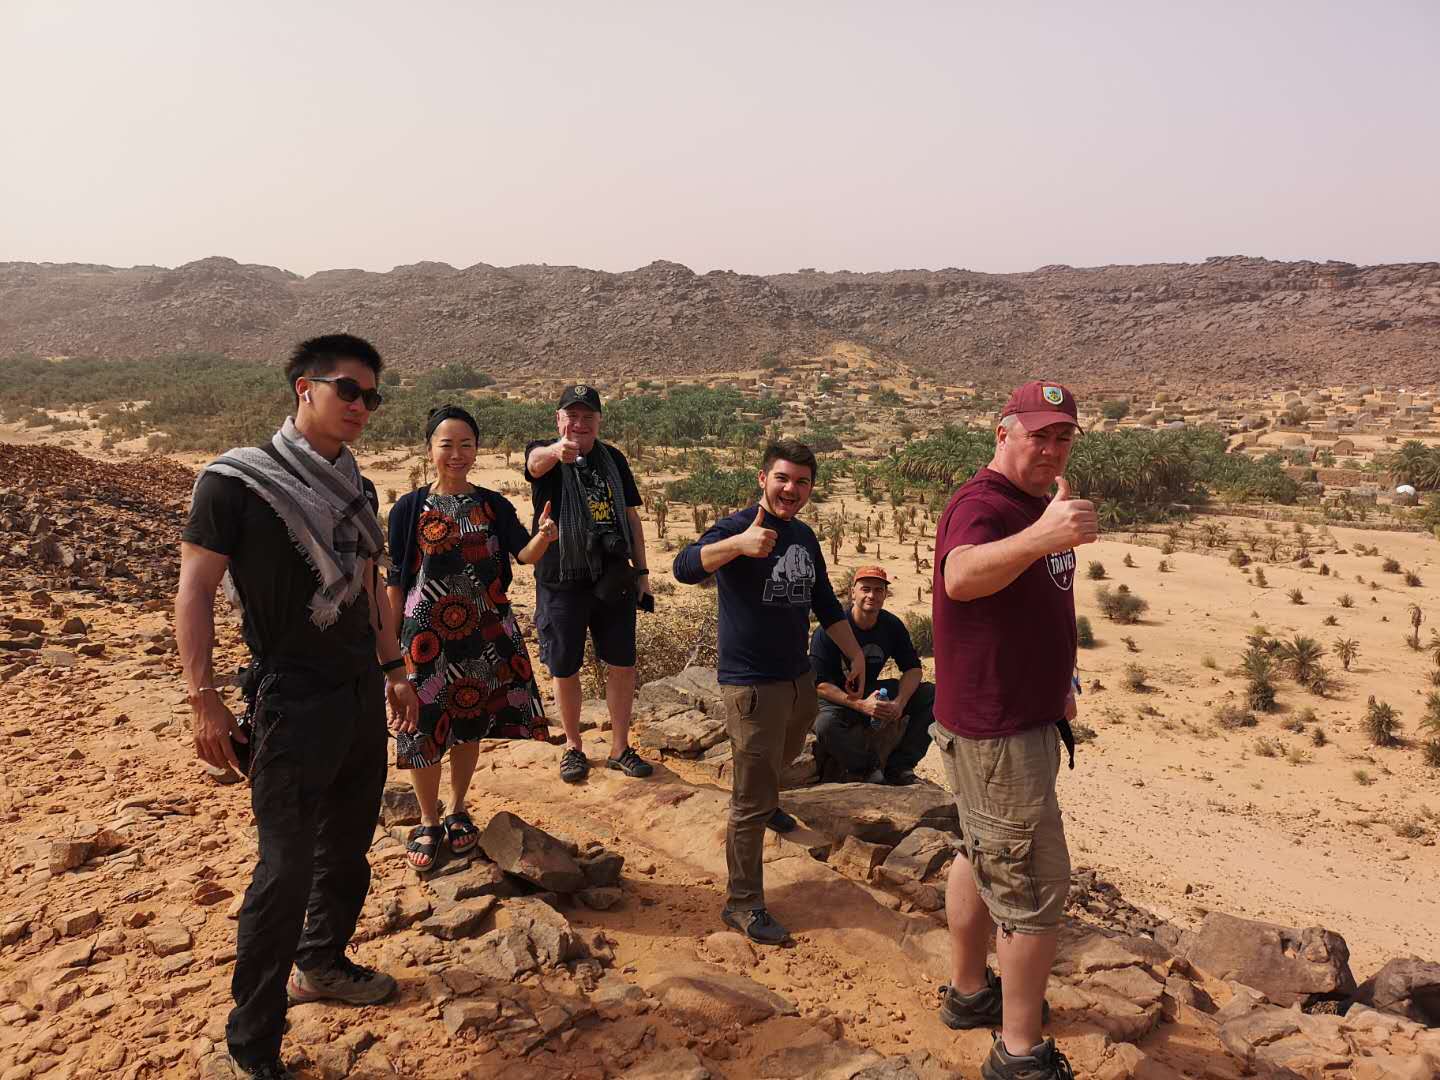 Our group enjoying the view of the White Valley Desert in Mauritania